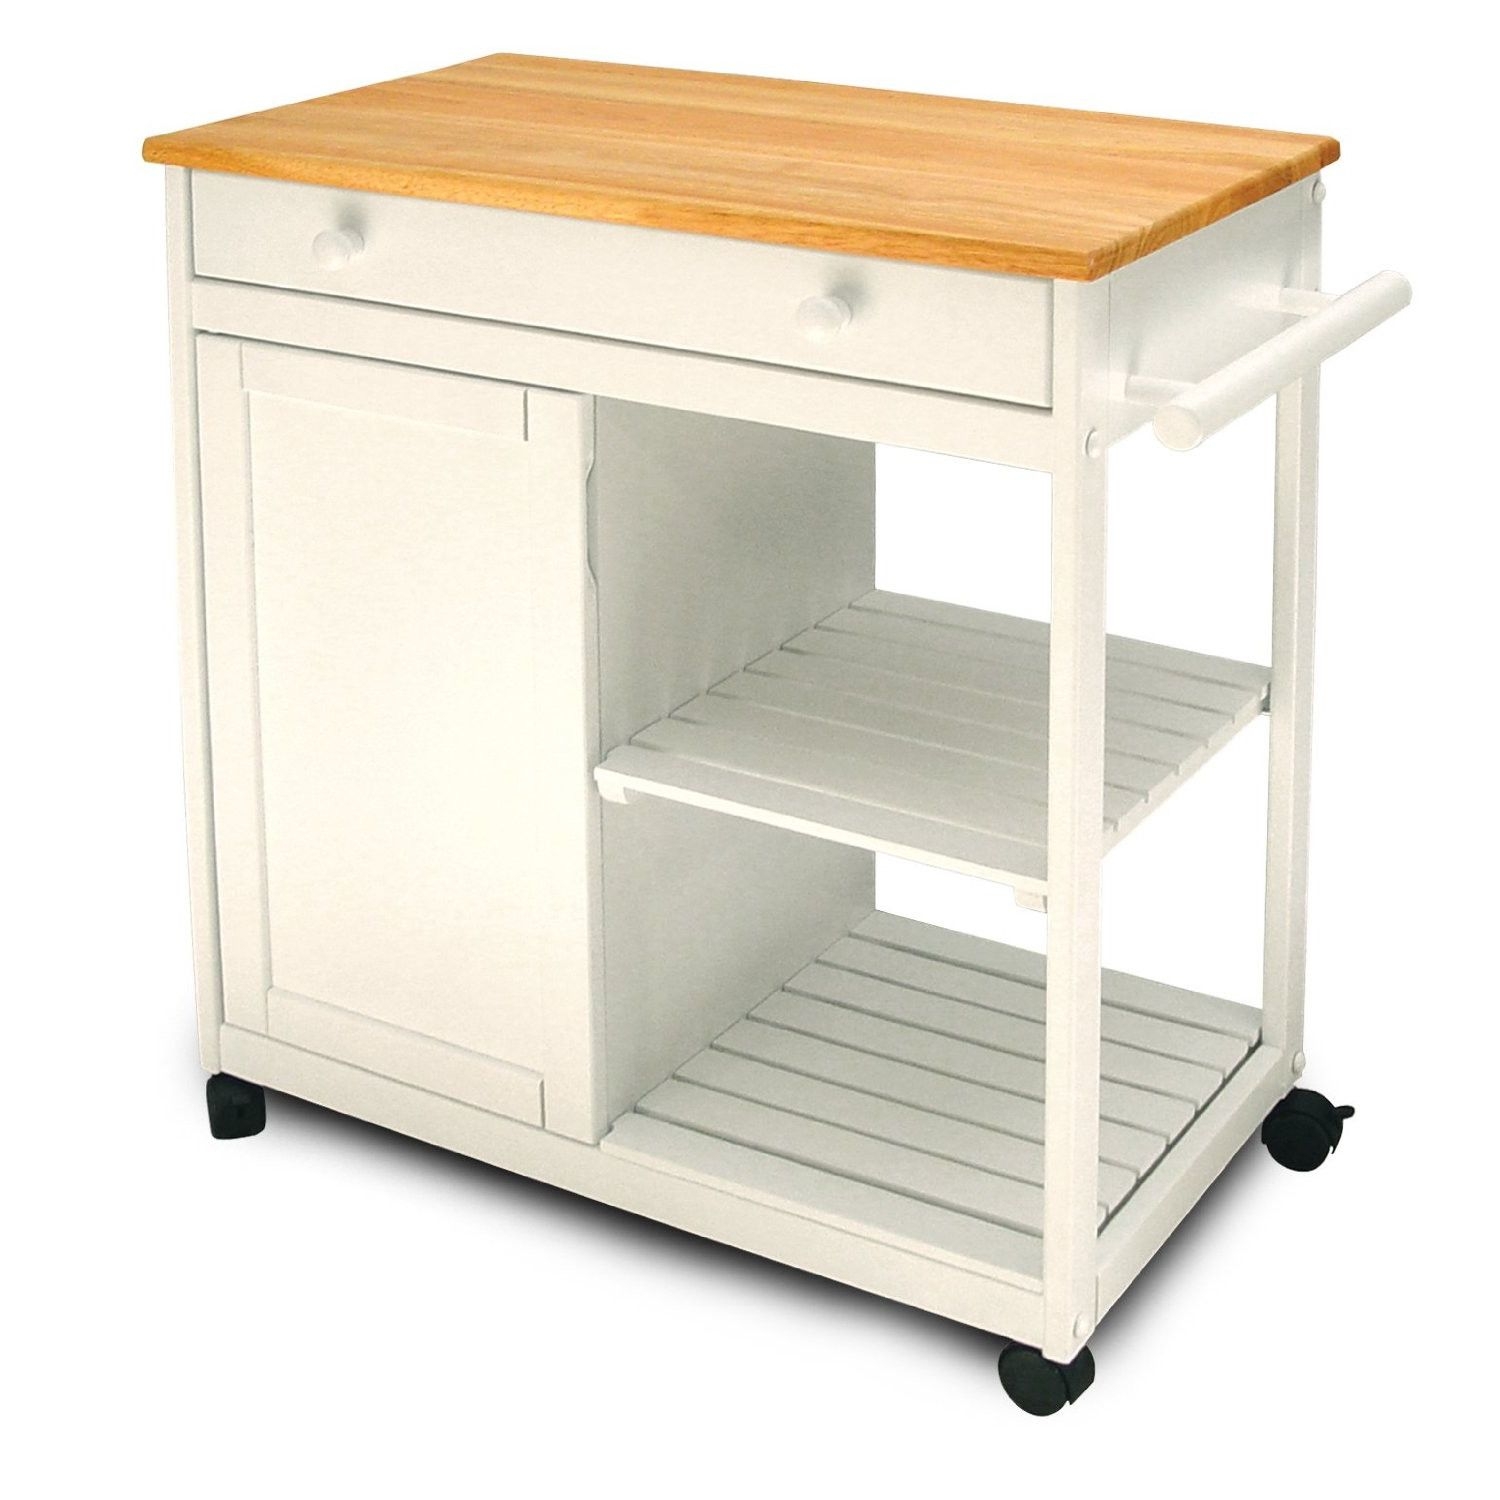 Cottage Kitchen Cart with Wooden Top